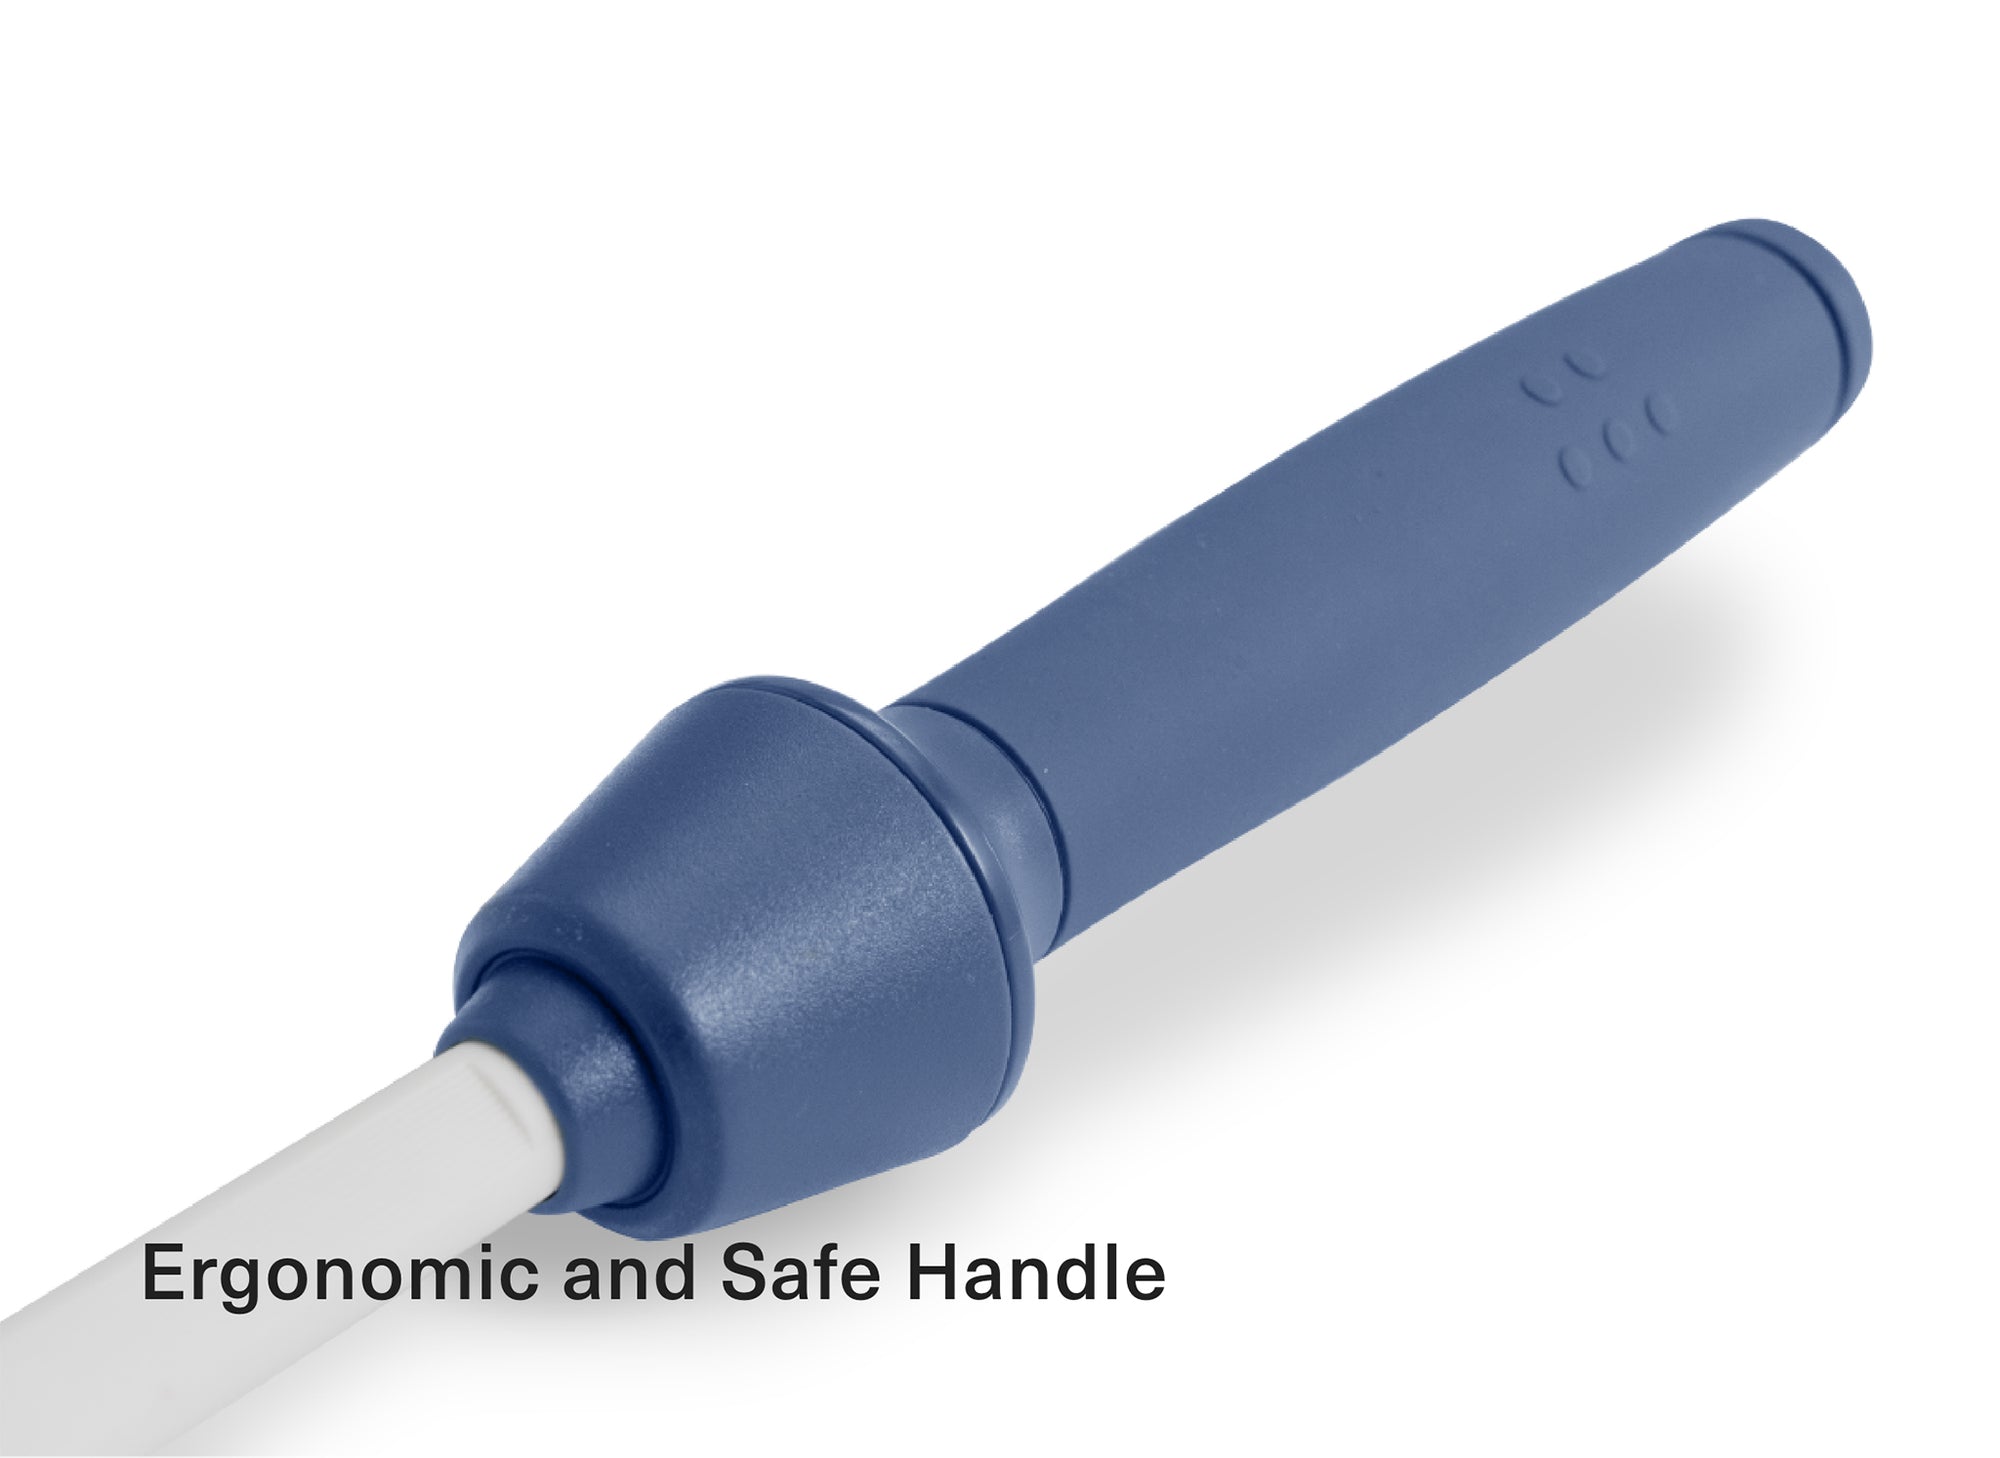 The honing rod has a long, slender cylindrical shape with an ergonomic and safe handle at one end and a sharpening surface made of ceramic at the other end.